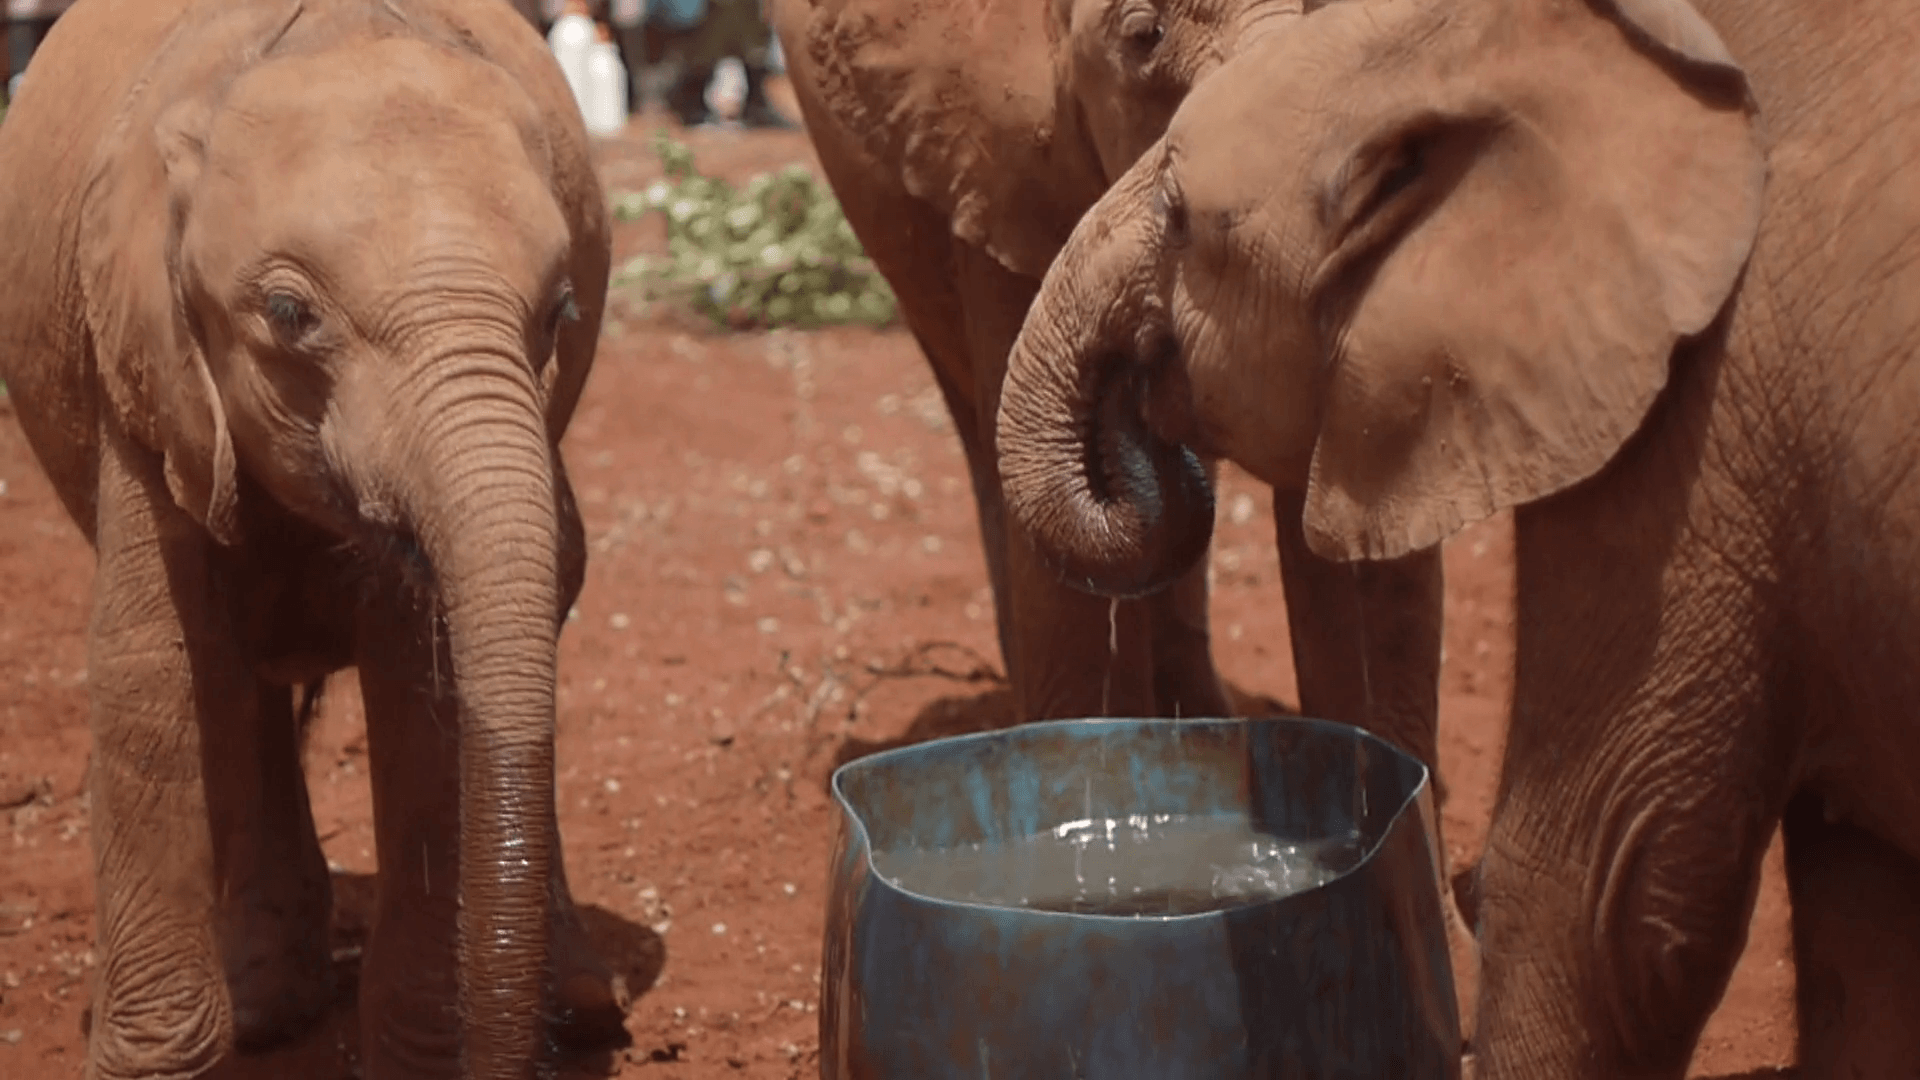 Baby elephants drinking water out of a can at Elephant orphanage